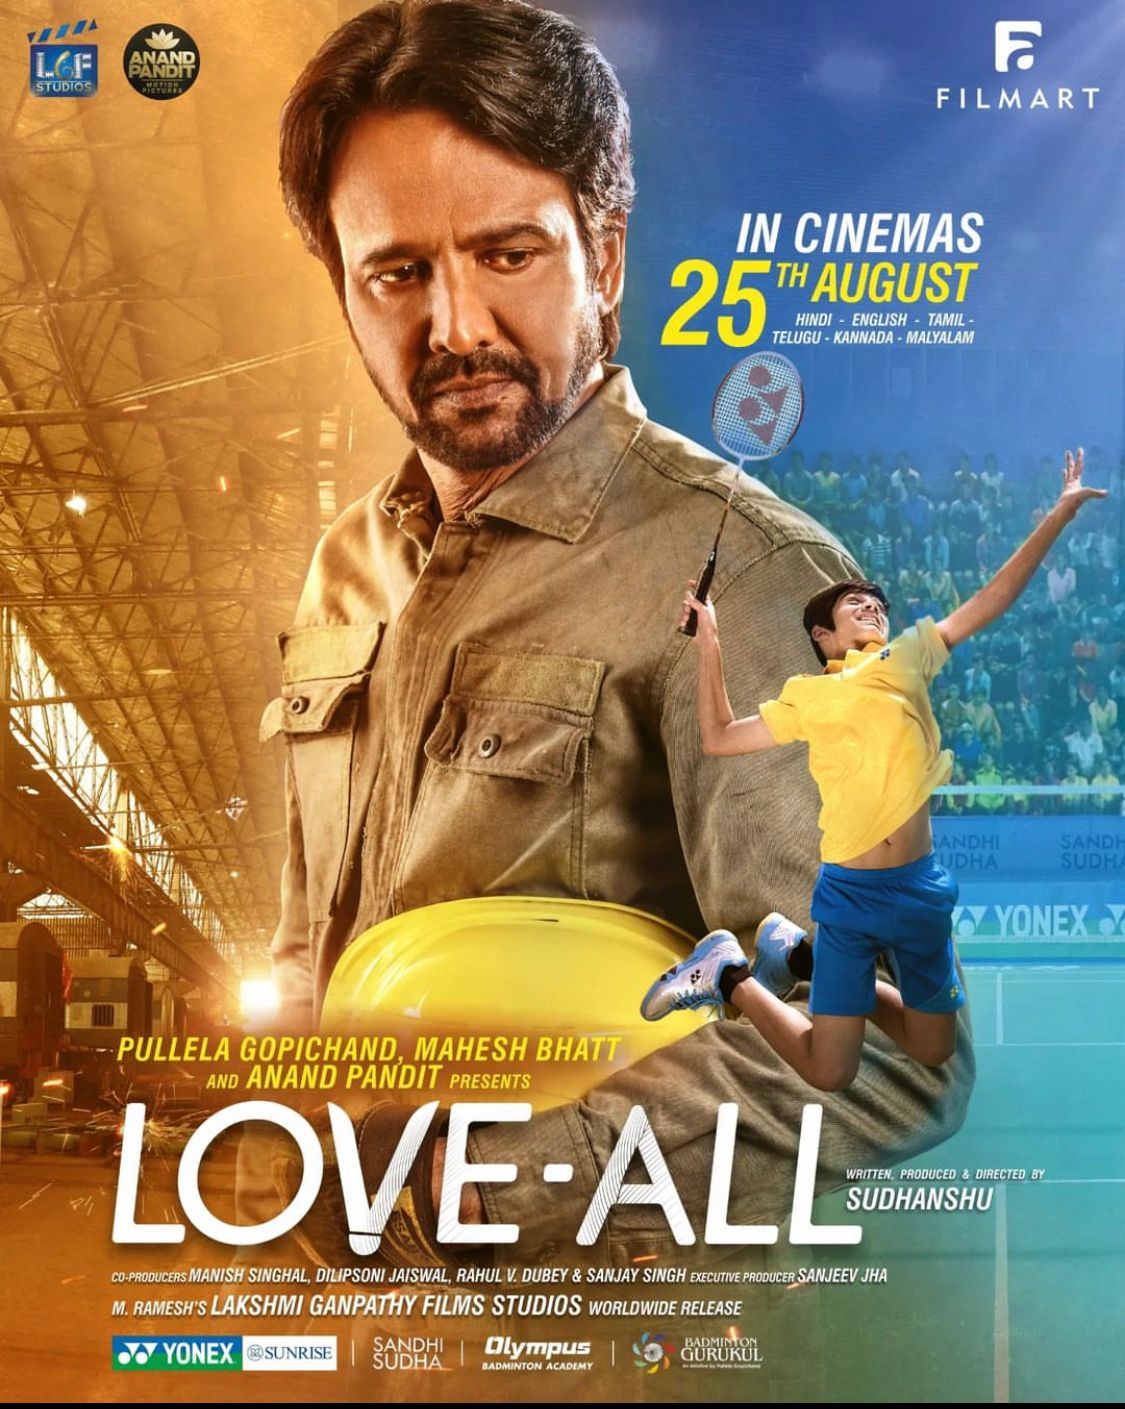 "Love All" Trailer: An Aspirational Sports Drama with Life Lessons, Says Anand Pandit